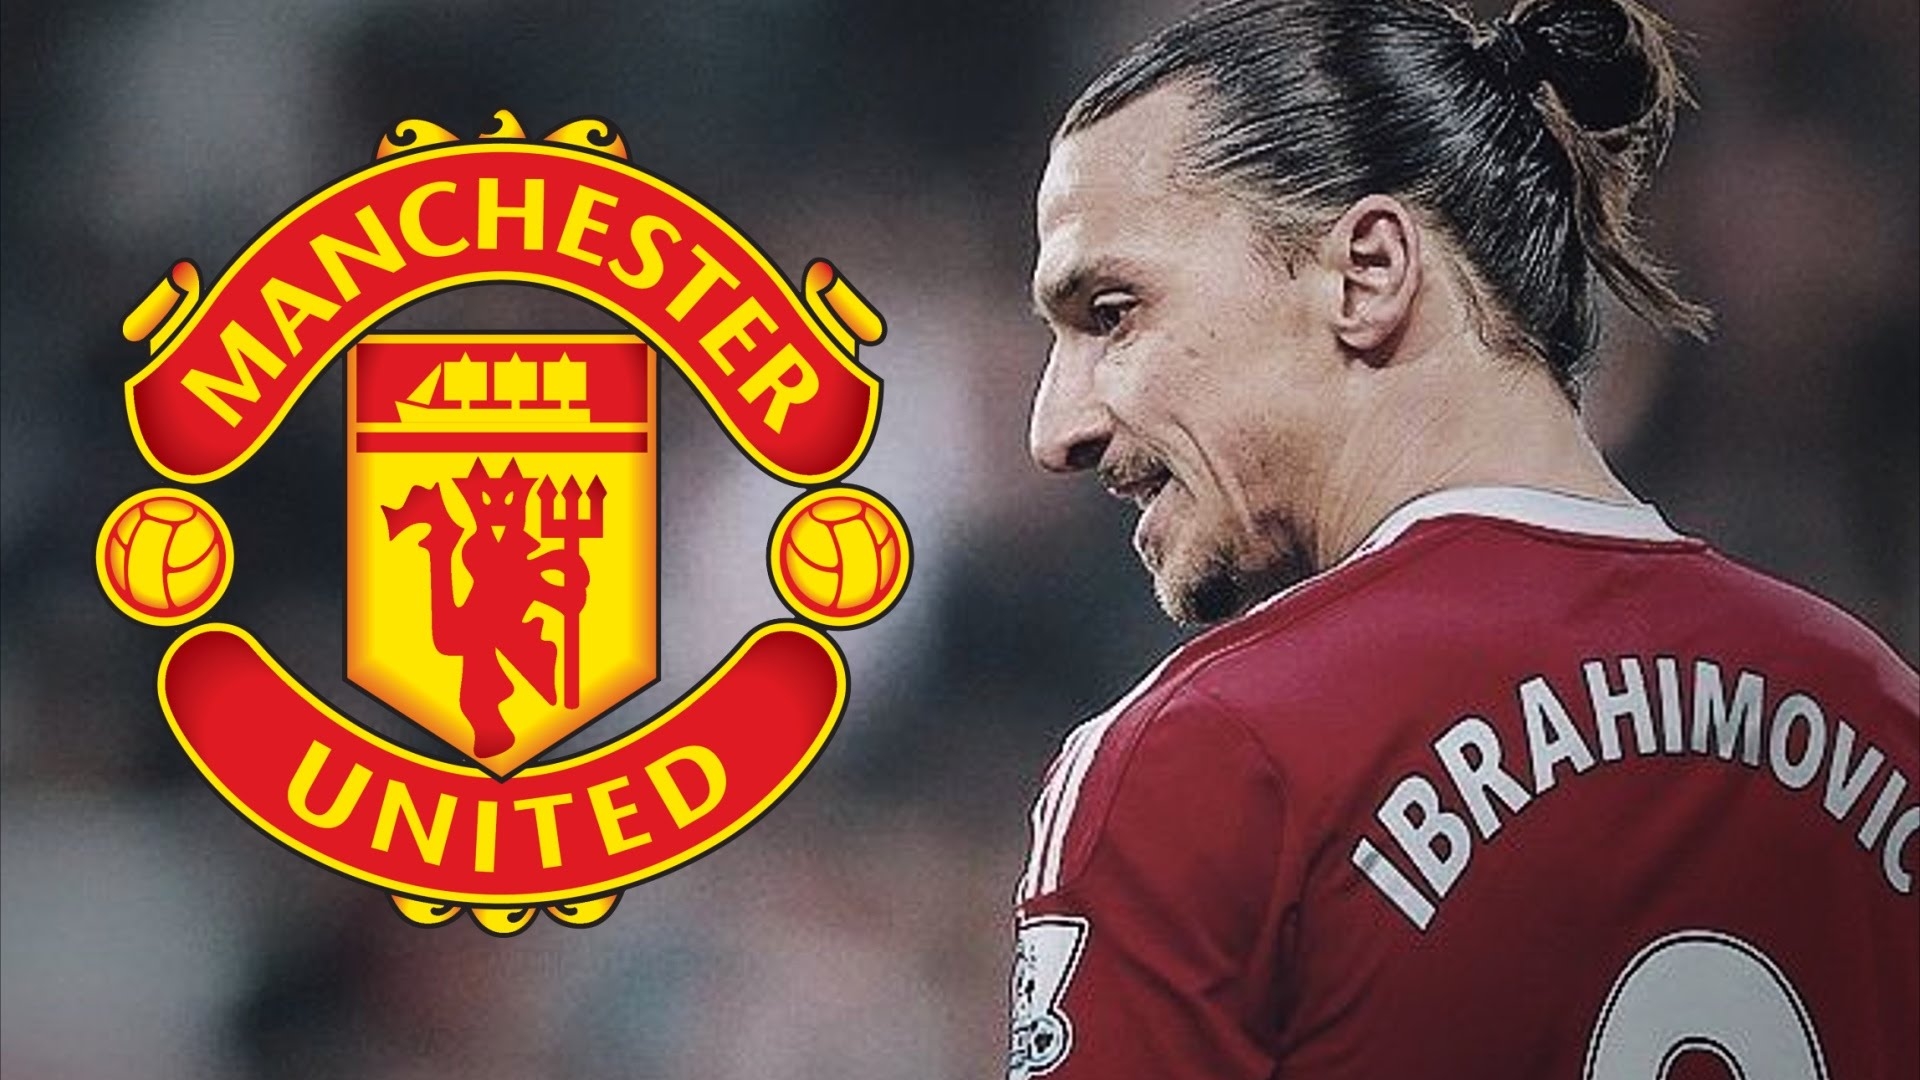 Download - Manchester United Zlatan Ibrahimovic , HD Wallpaper & Backgrounds